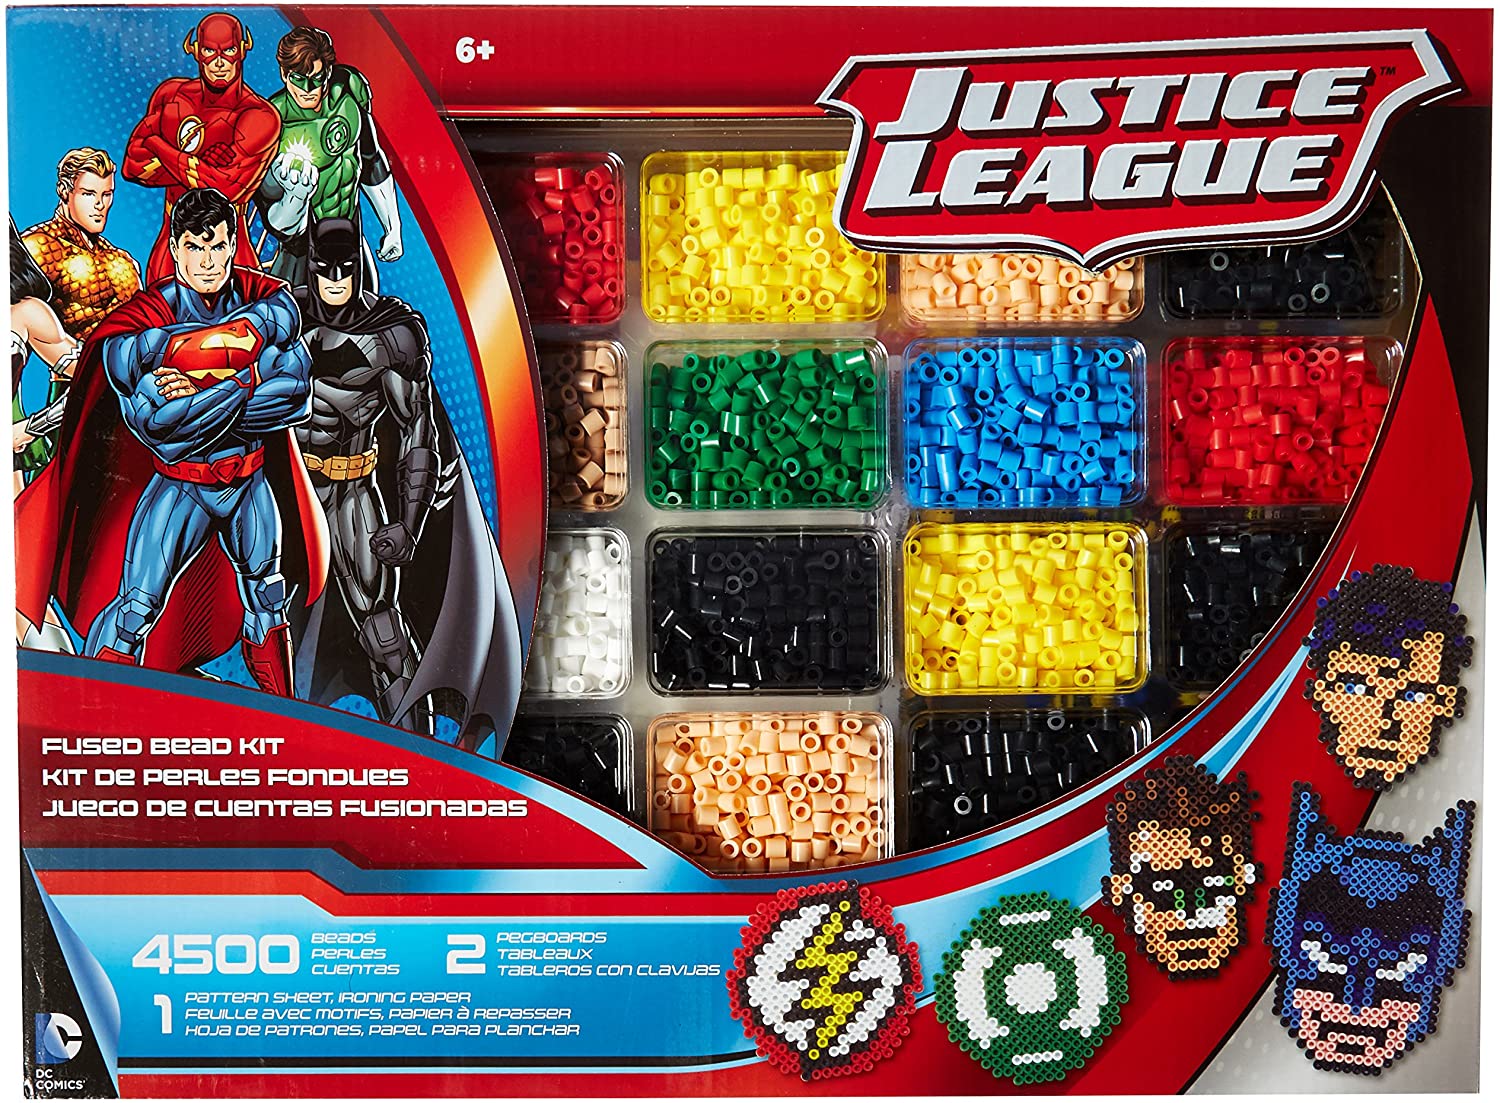 Justice League Deluxe Box